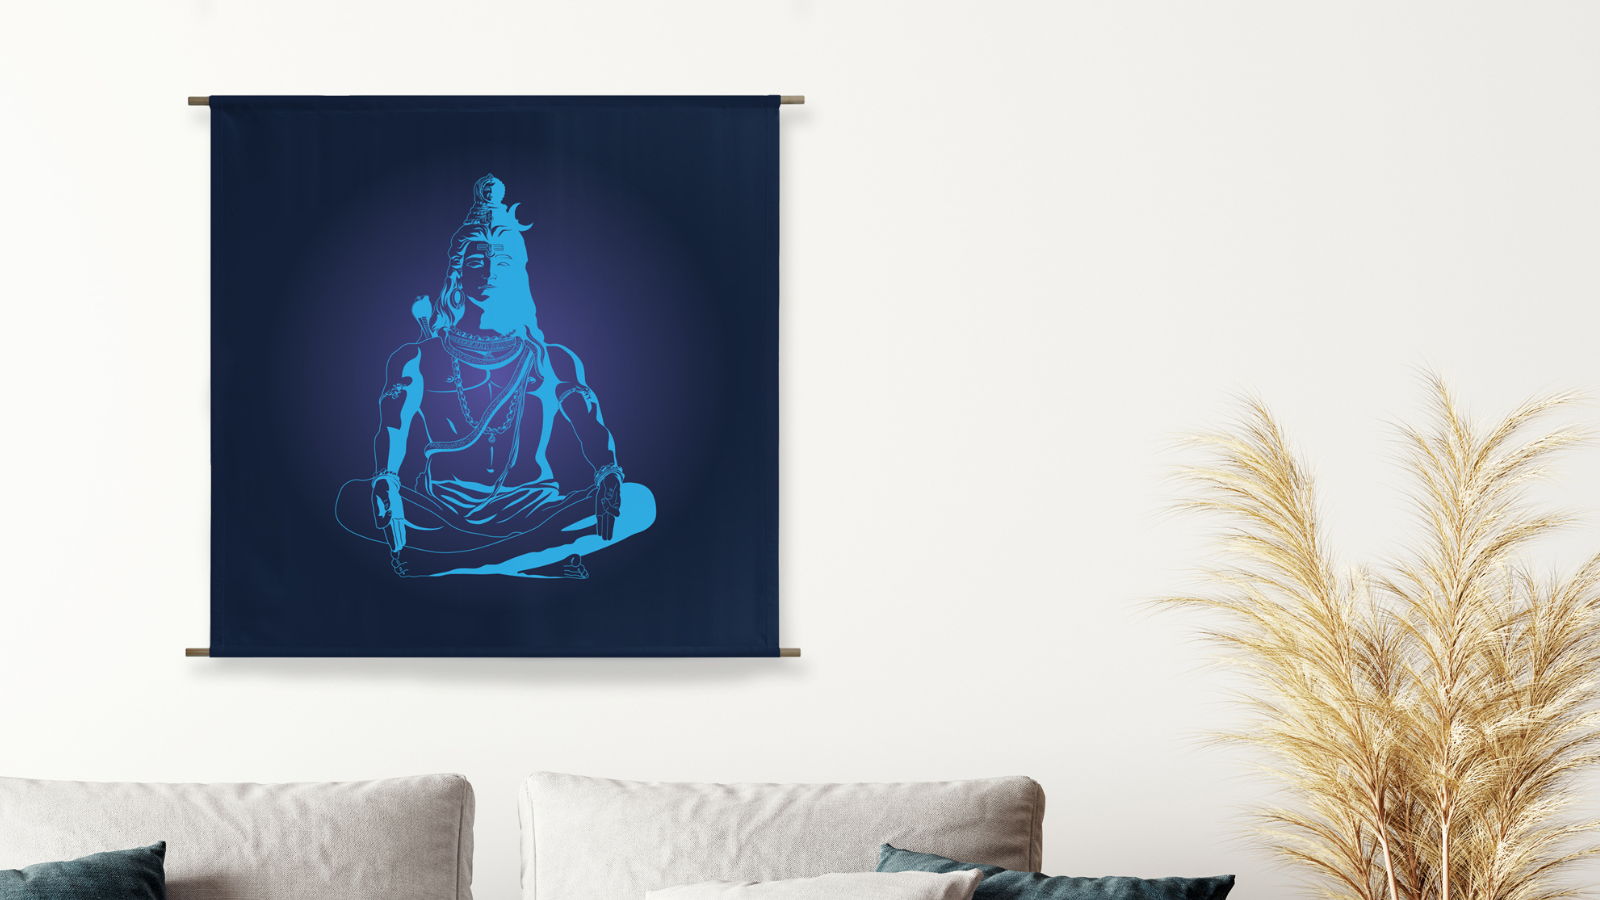 Shiva Yantra represents the Divine Masculine energy in the tantric tradition